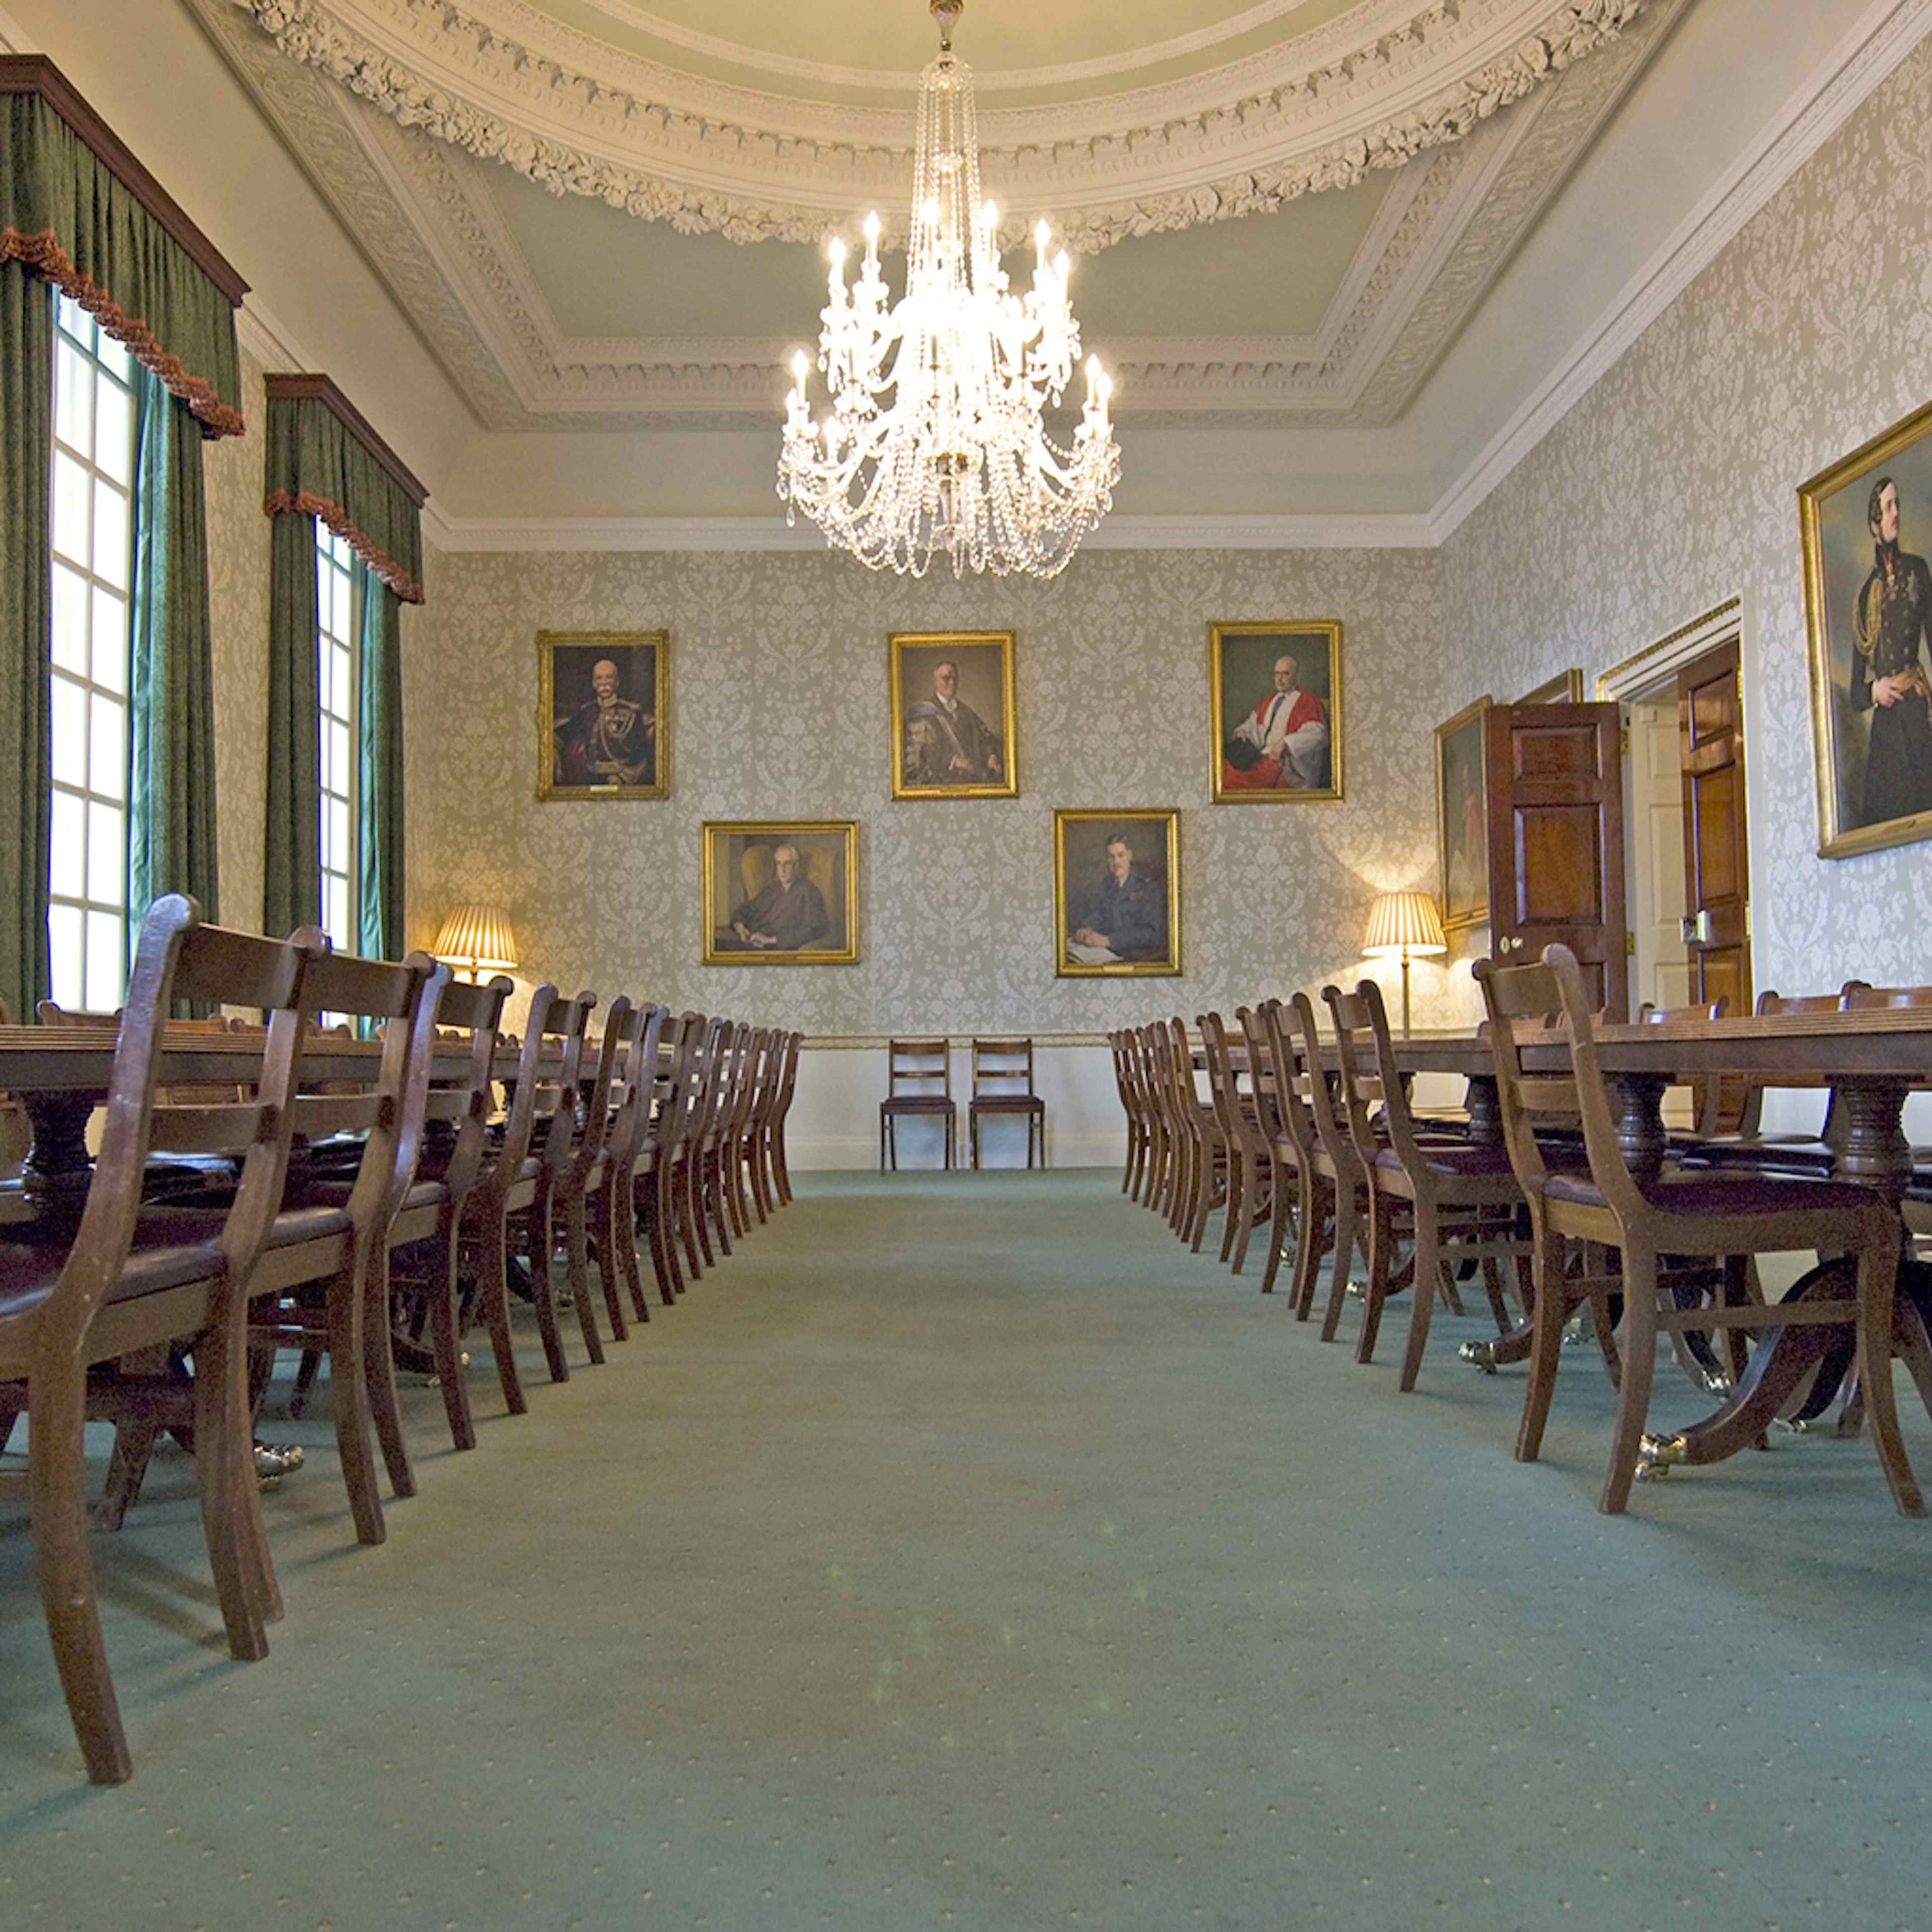 Imperial Venues - 170 Queen's Gate  - The Council Room image 3